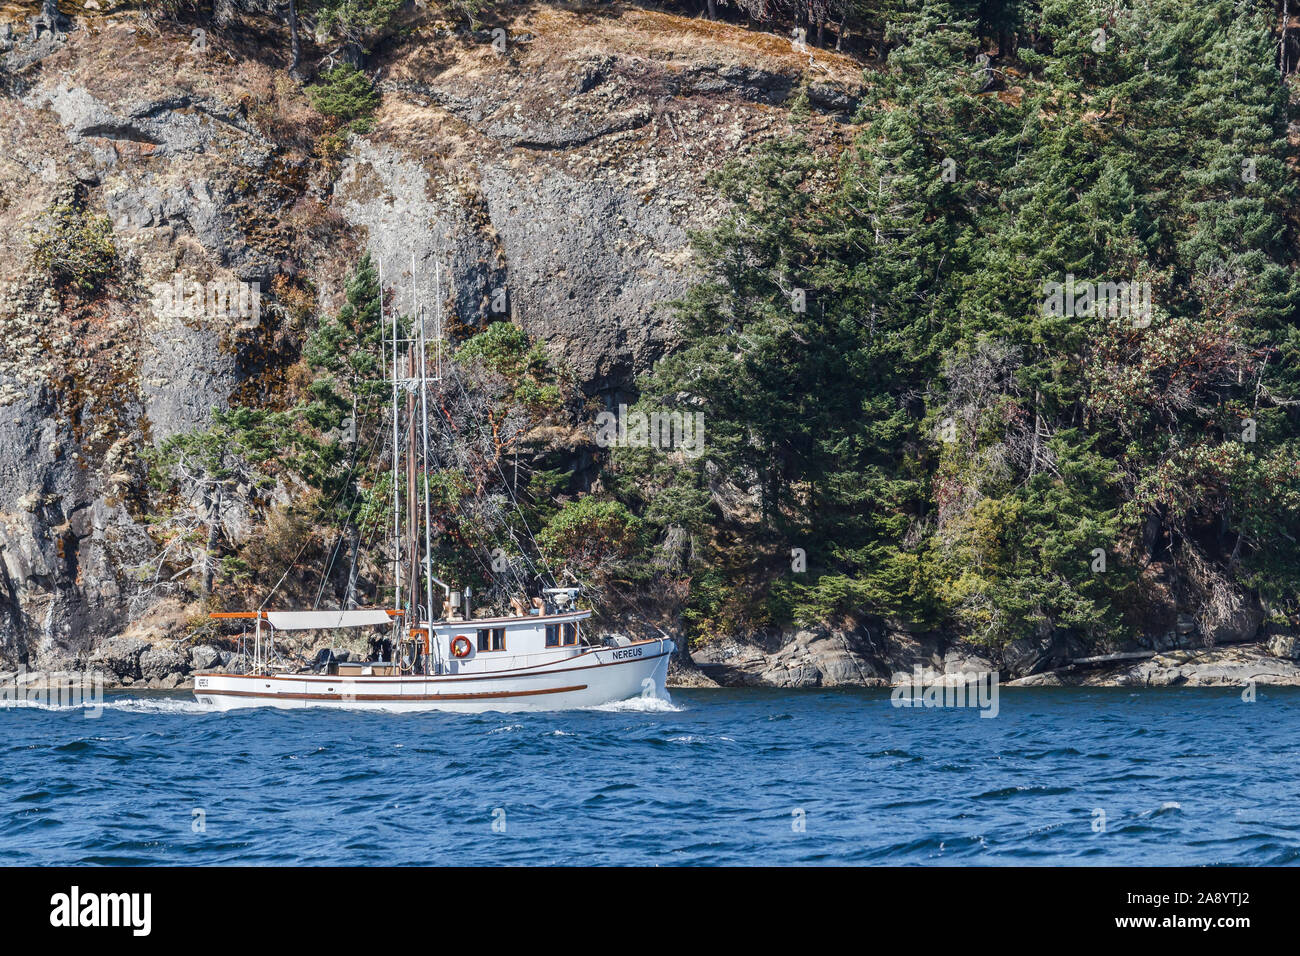 A former commercial fishing vessel, converted to a pleasure boat, is underway, motoring alongside a steep rocky shore on Salt Spring Island, BC. Stock Photo